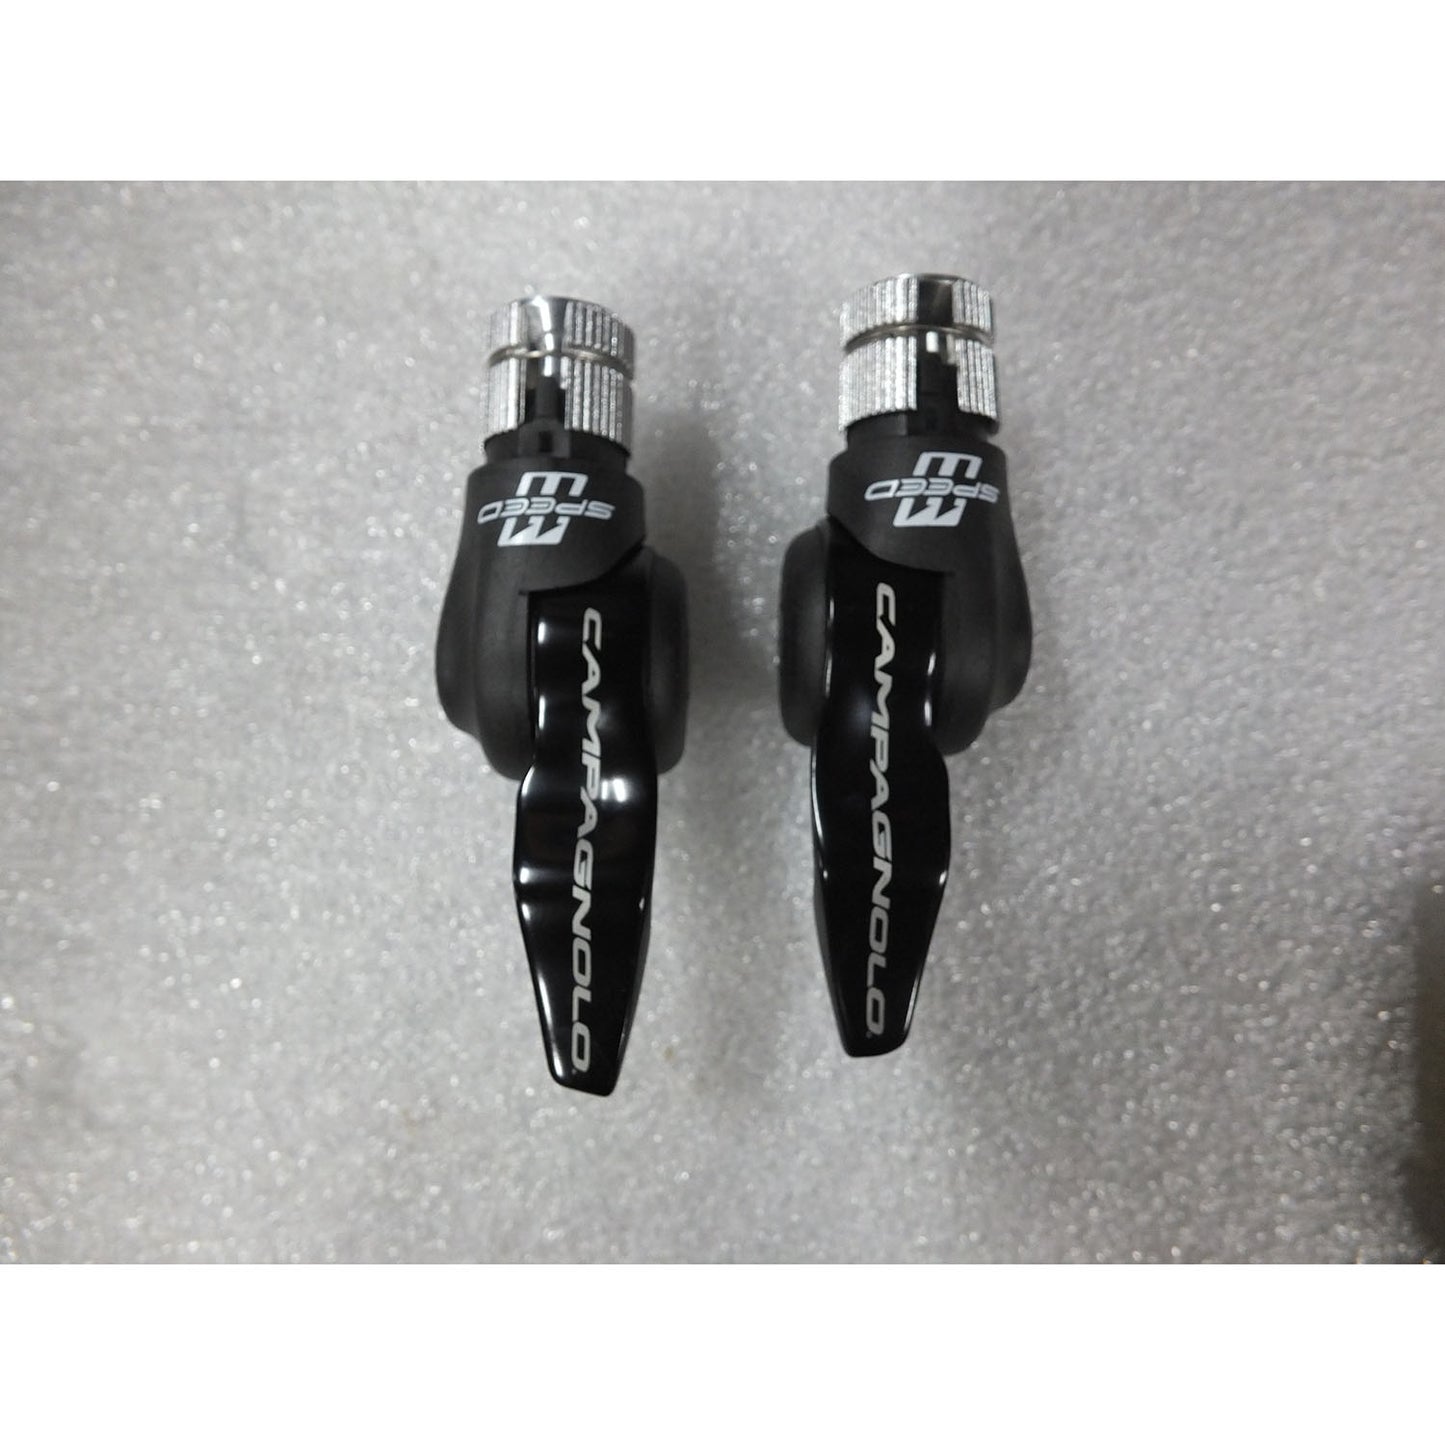 Campagnolo Bar End shifting alloy levers